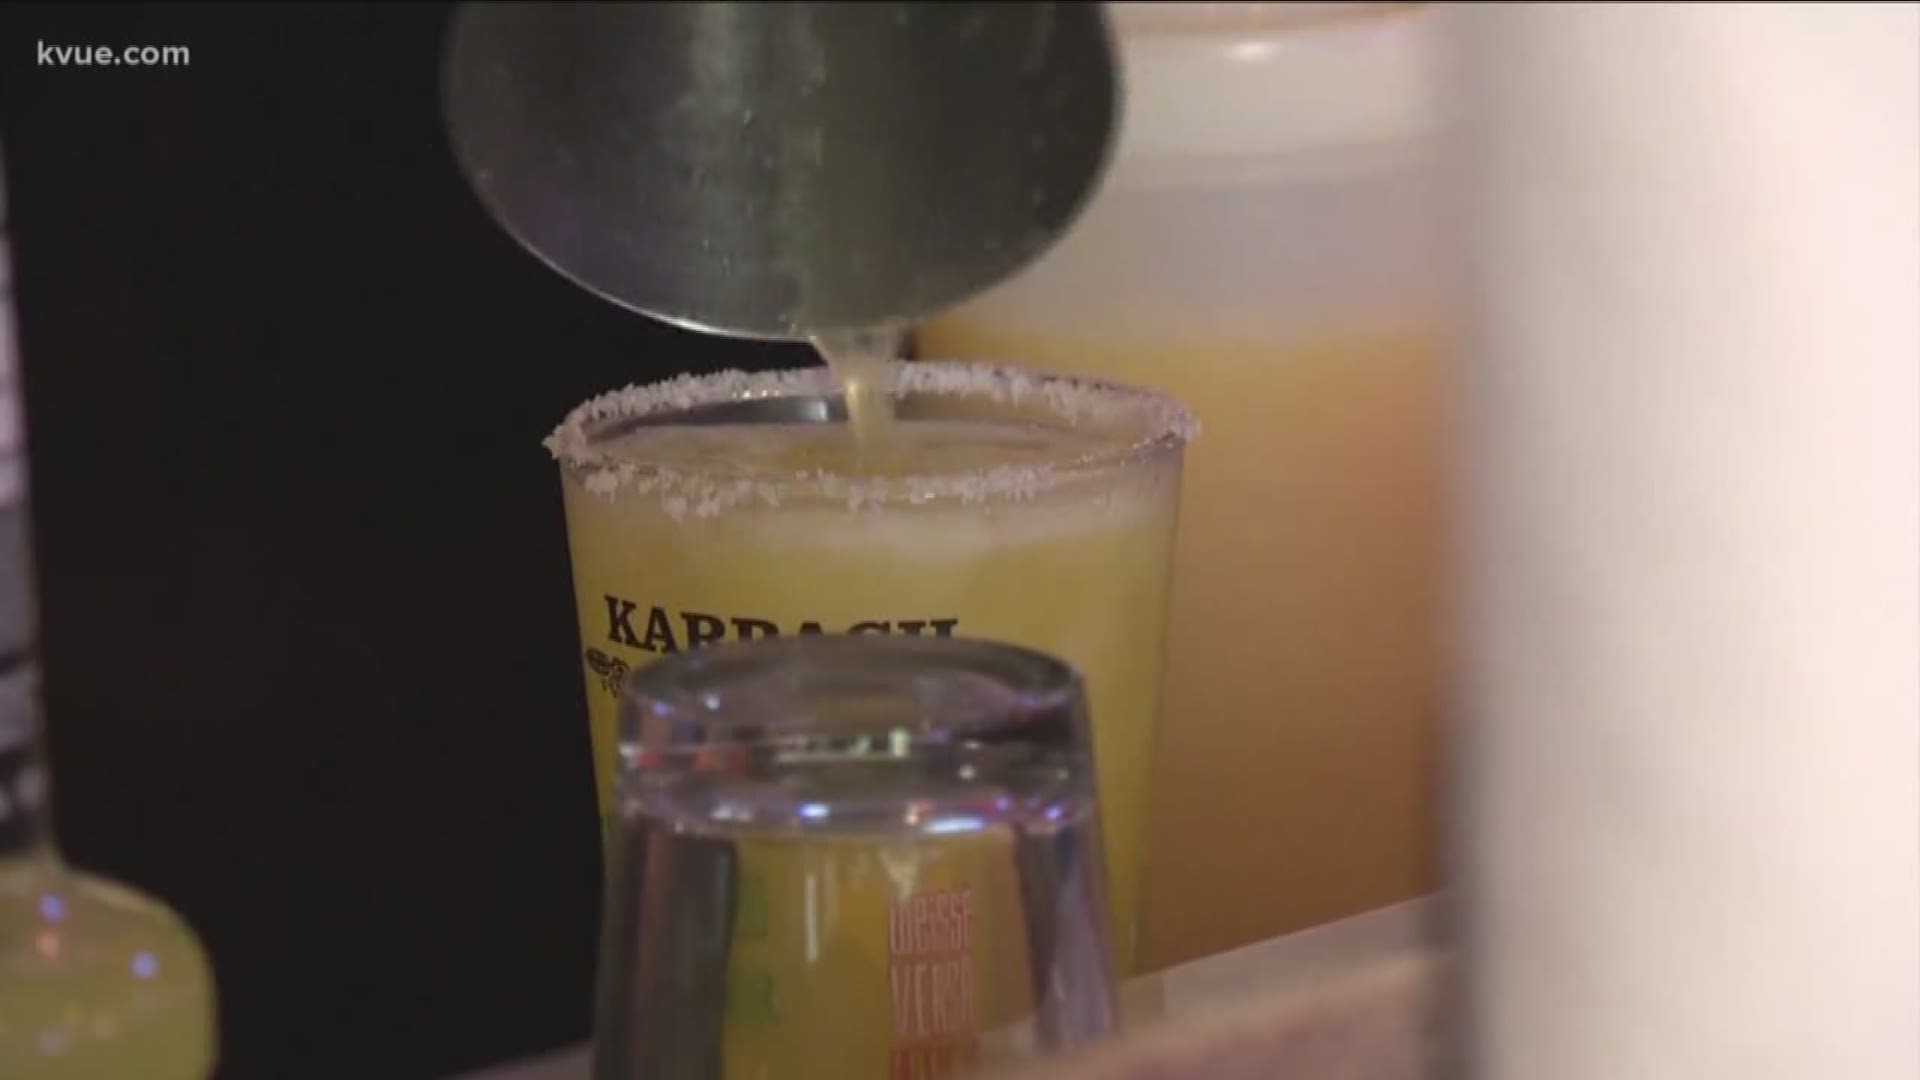 The Round Rock City Council approved a new ordinance Thursday that will allow bars and restaurants to serve beer, wine and liquor until 2 a.m. seven days a week. Right now, businesses can only do so until midnight on a weeknight.
STORY: http://www.kvue.co